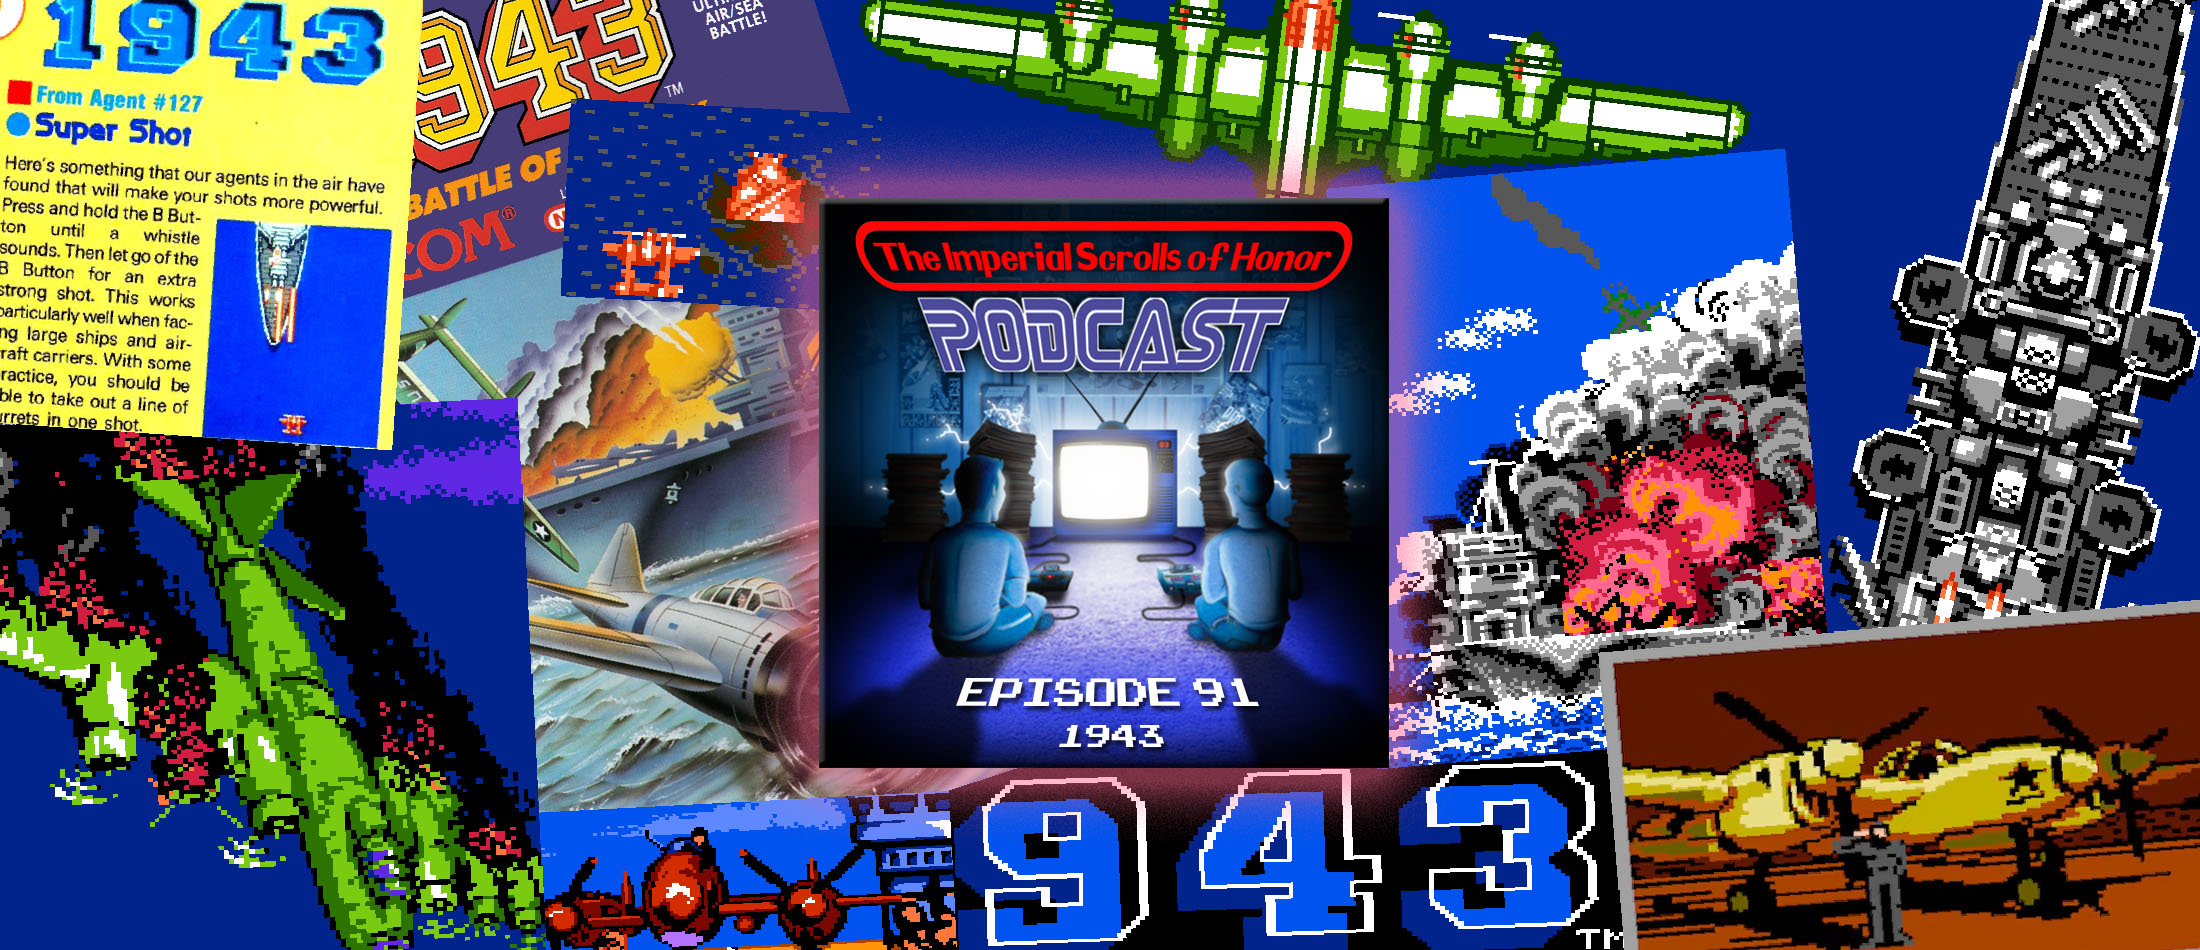 The Imperial Scrolls of Honor Podcast - Ep 91 - 1943 (NES)